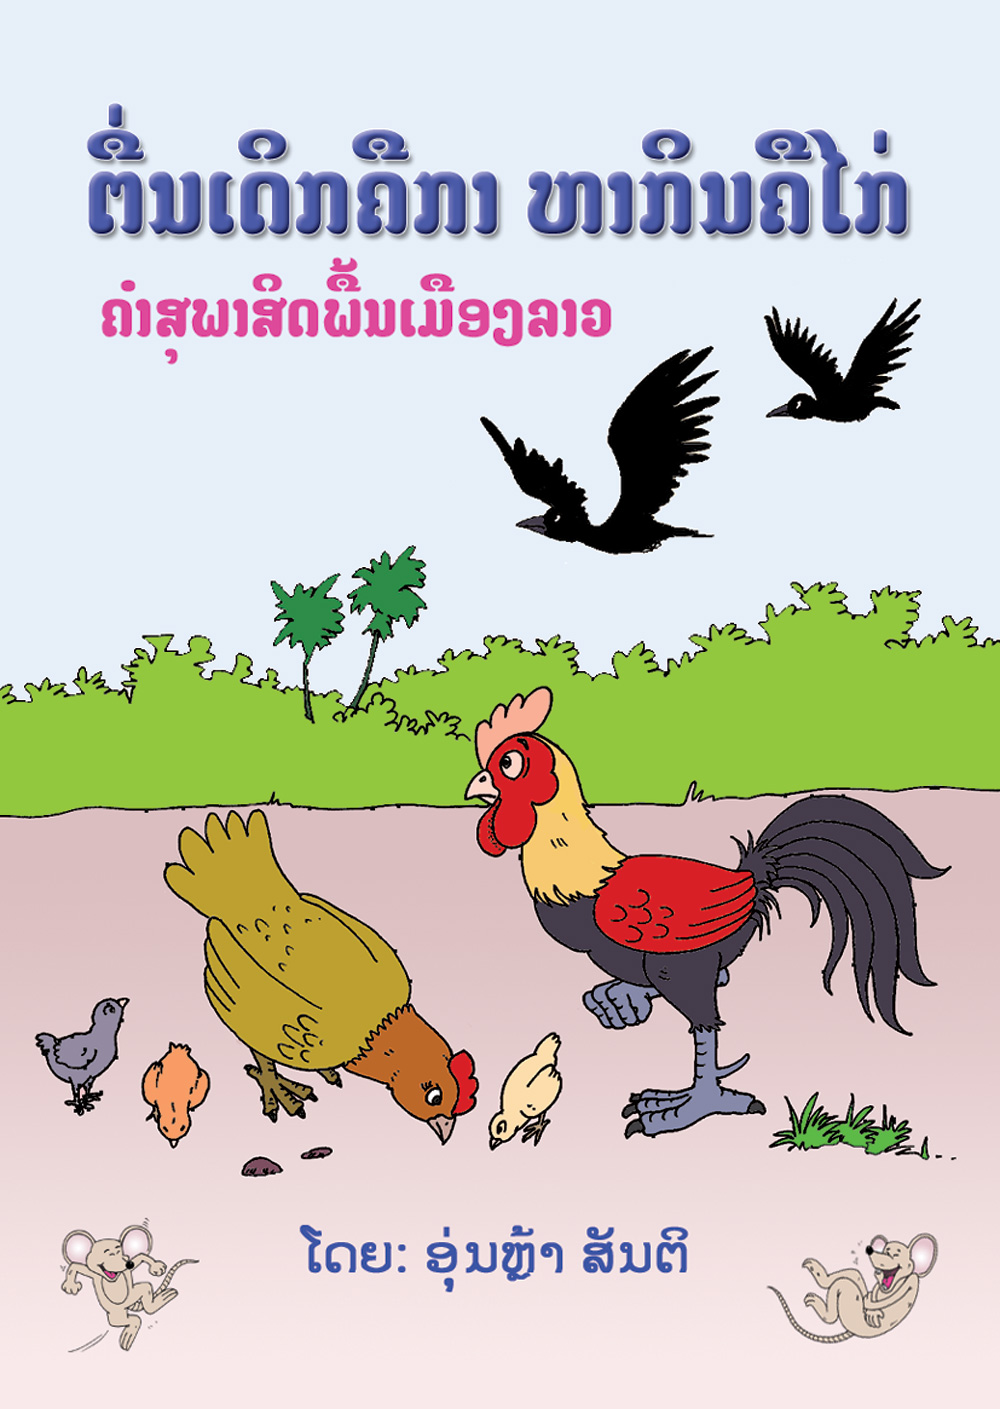 Get up early like a crow large book cover, published in Lao language